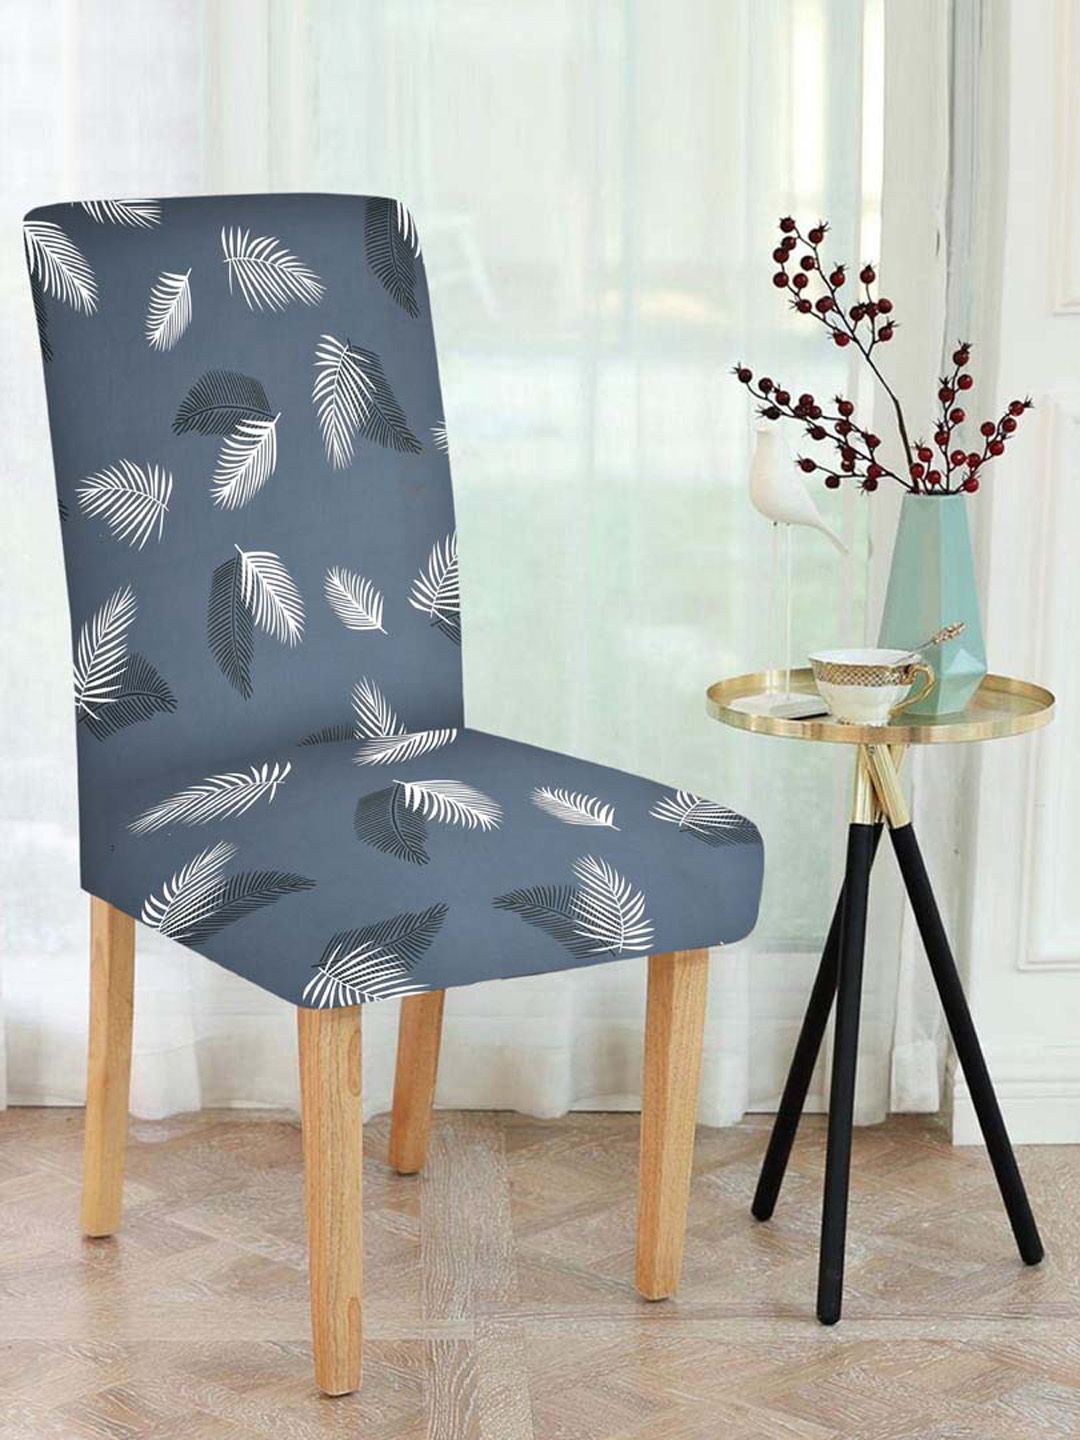 Slushy Mushy Pack Of 6 Printed Chair Covers Price in India